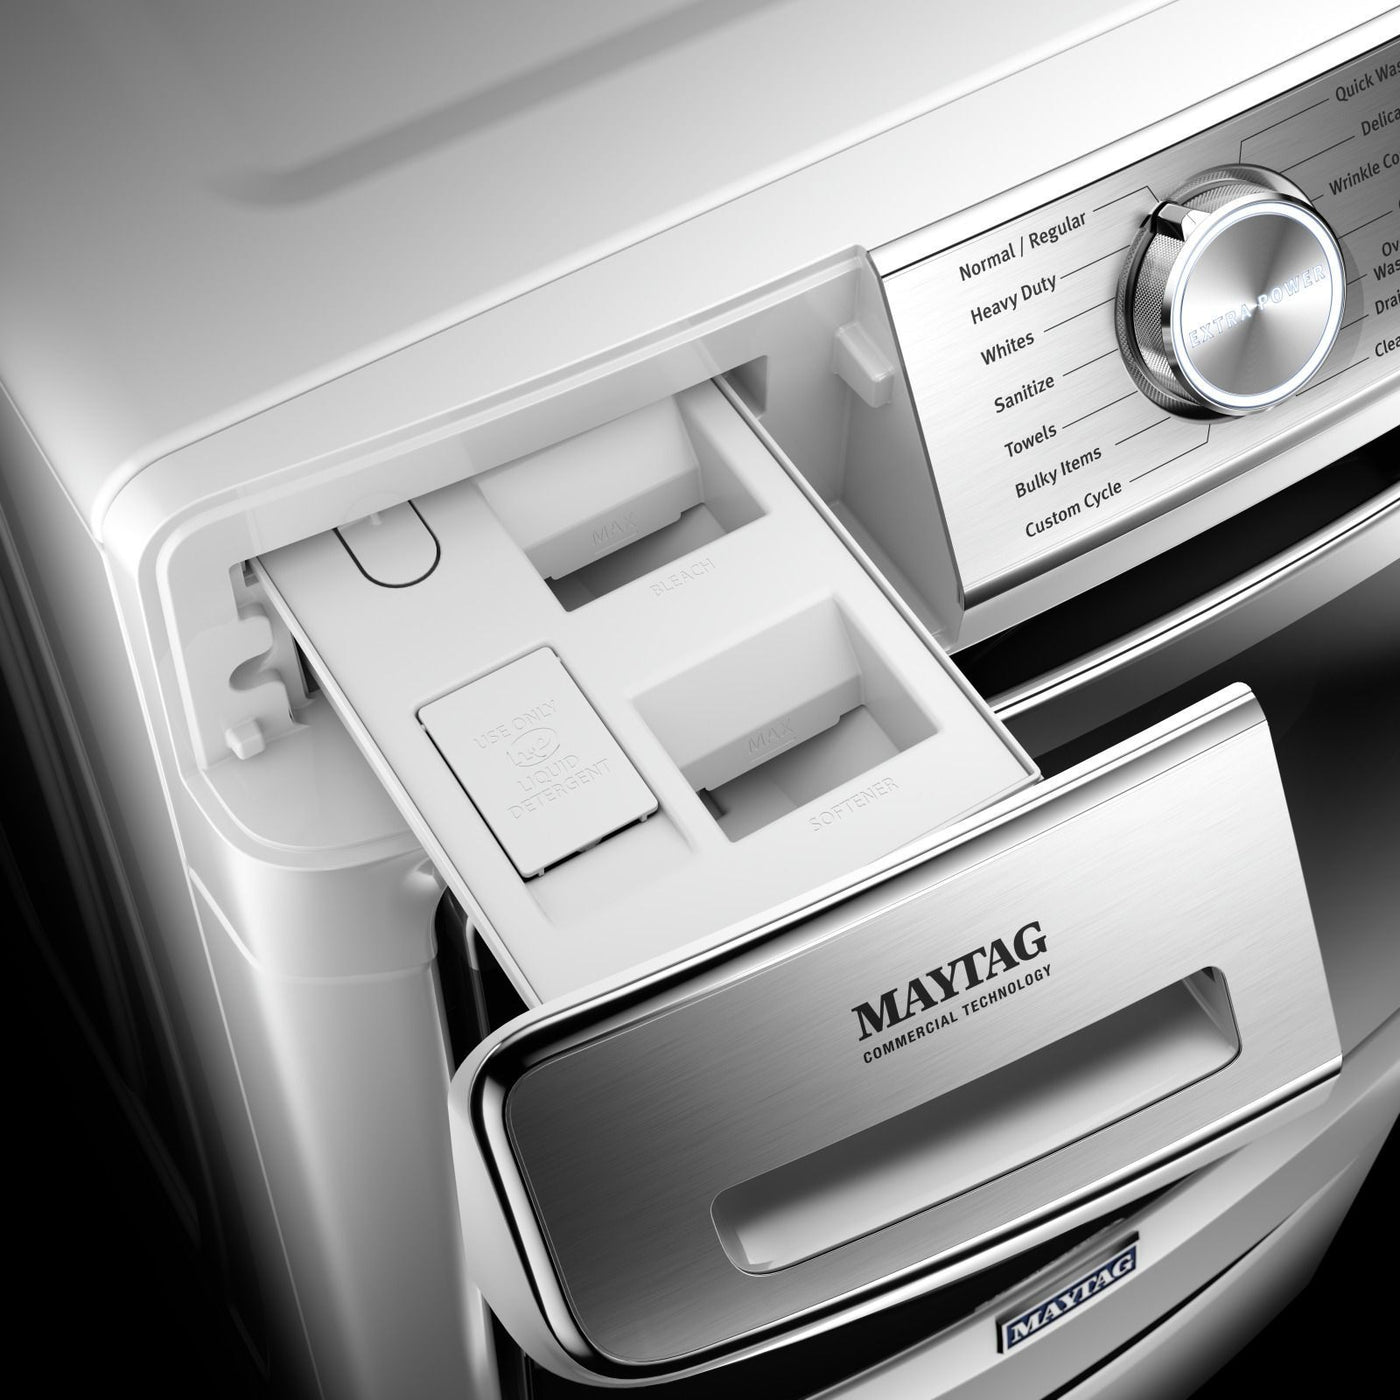 How To Fix The Error Code F40 For Maytag Washing Machine